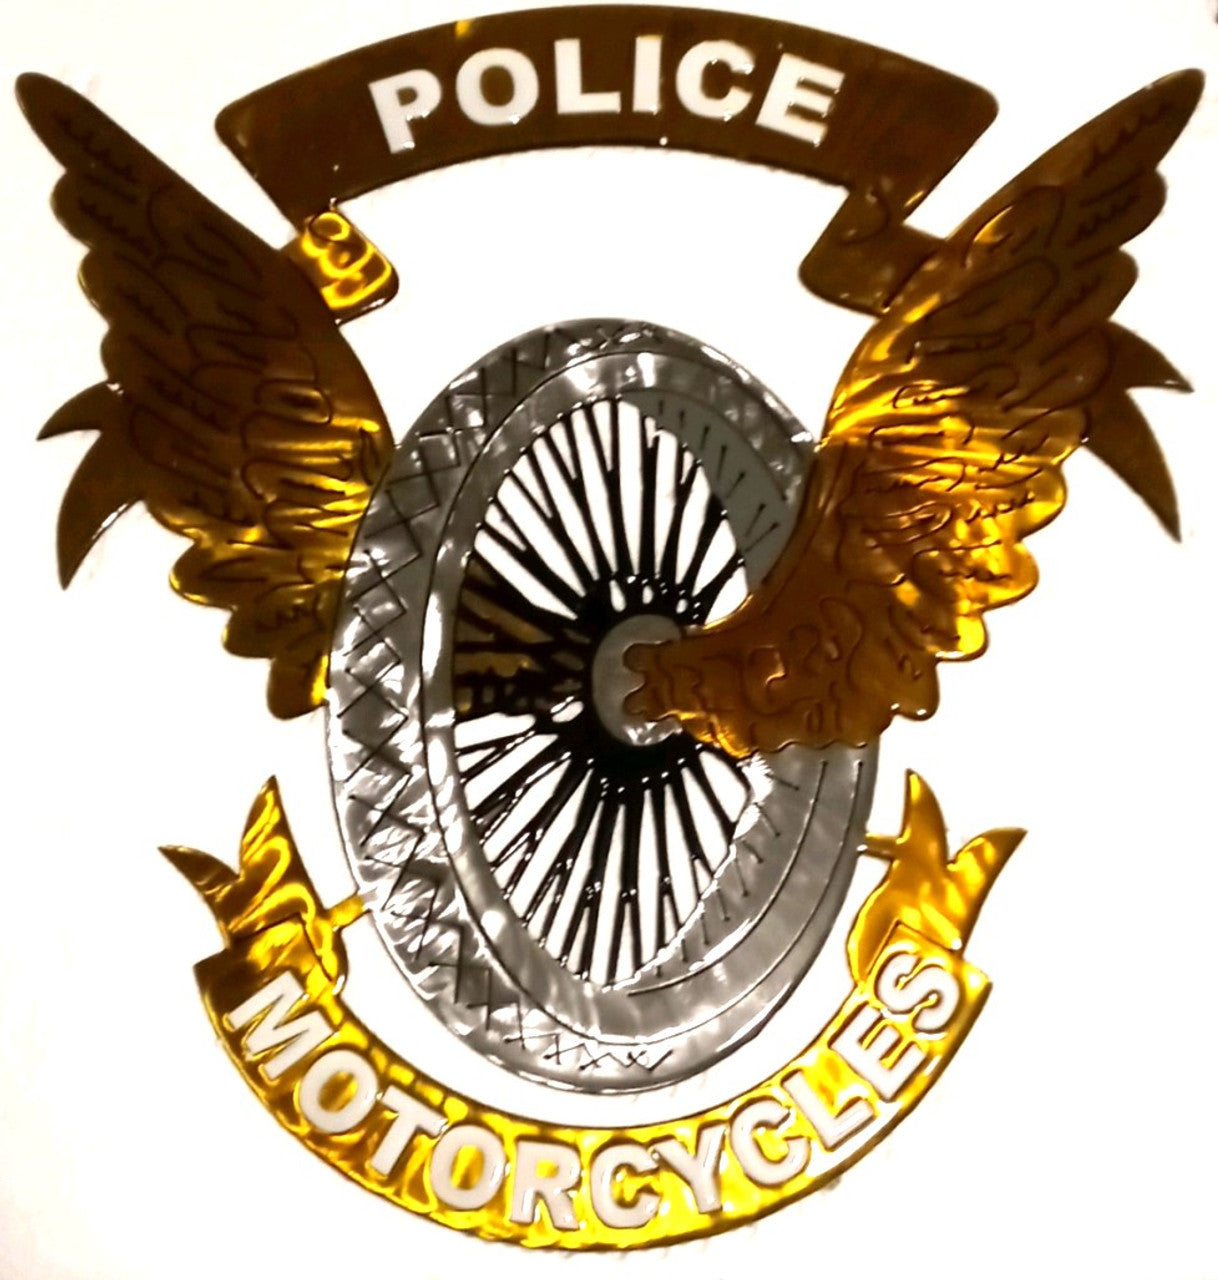 MOTORCYCLE POLICE  BADGE